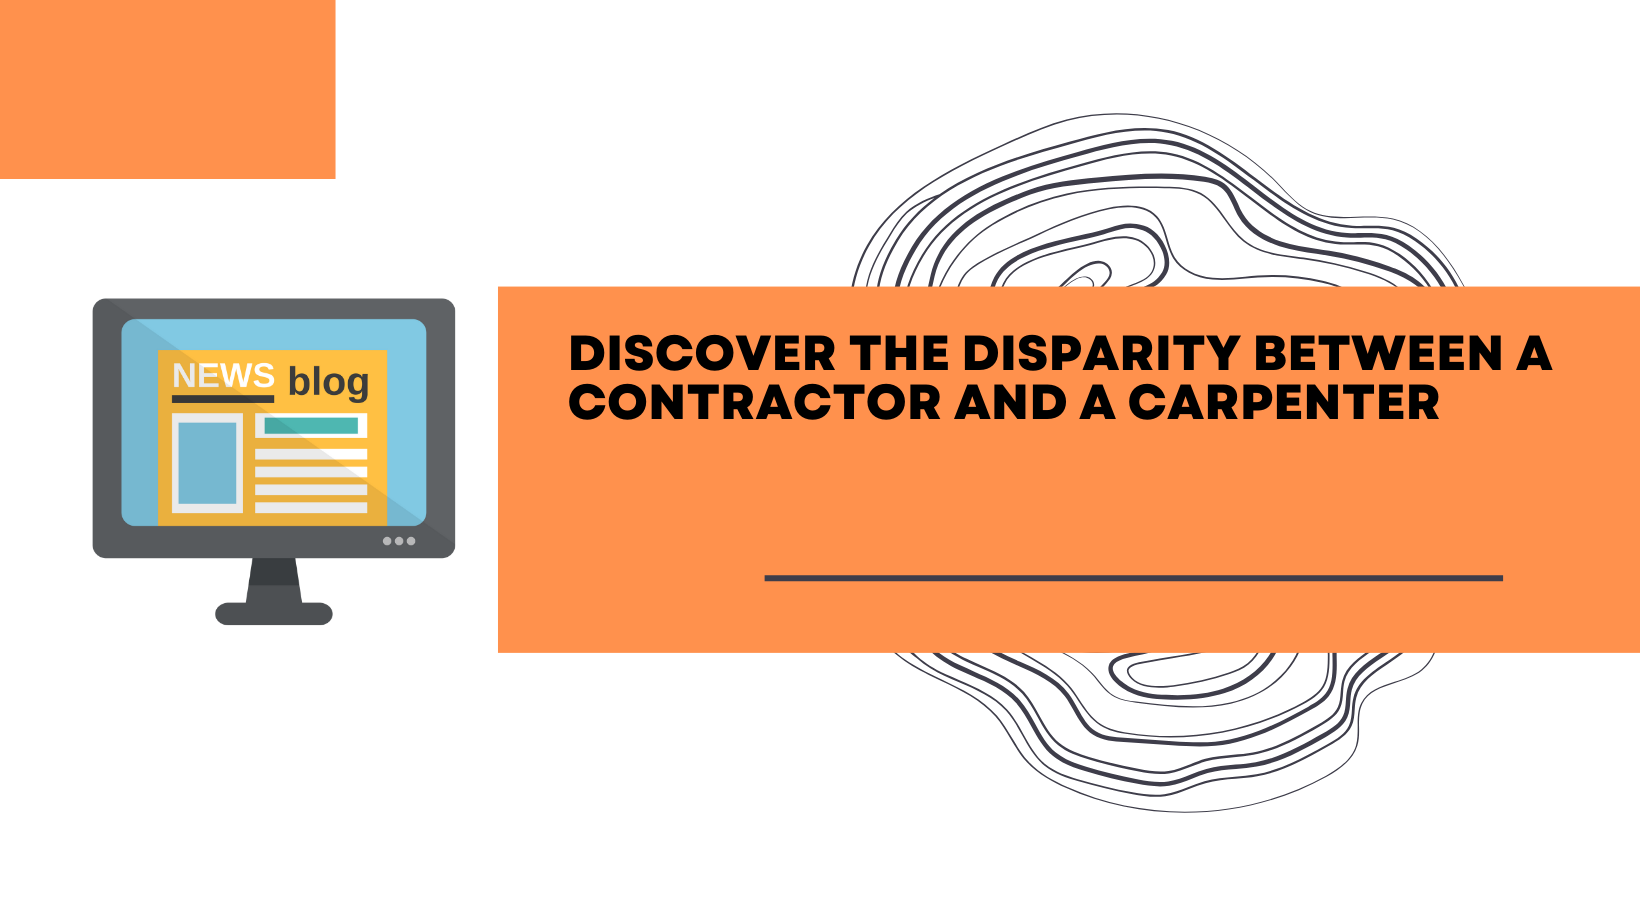 Discover the disparity between a contractor and a carpenter.